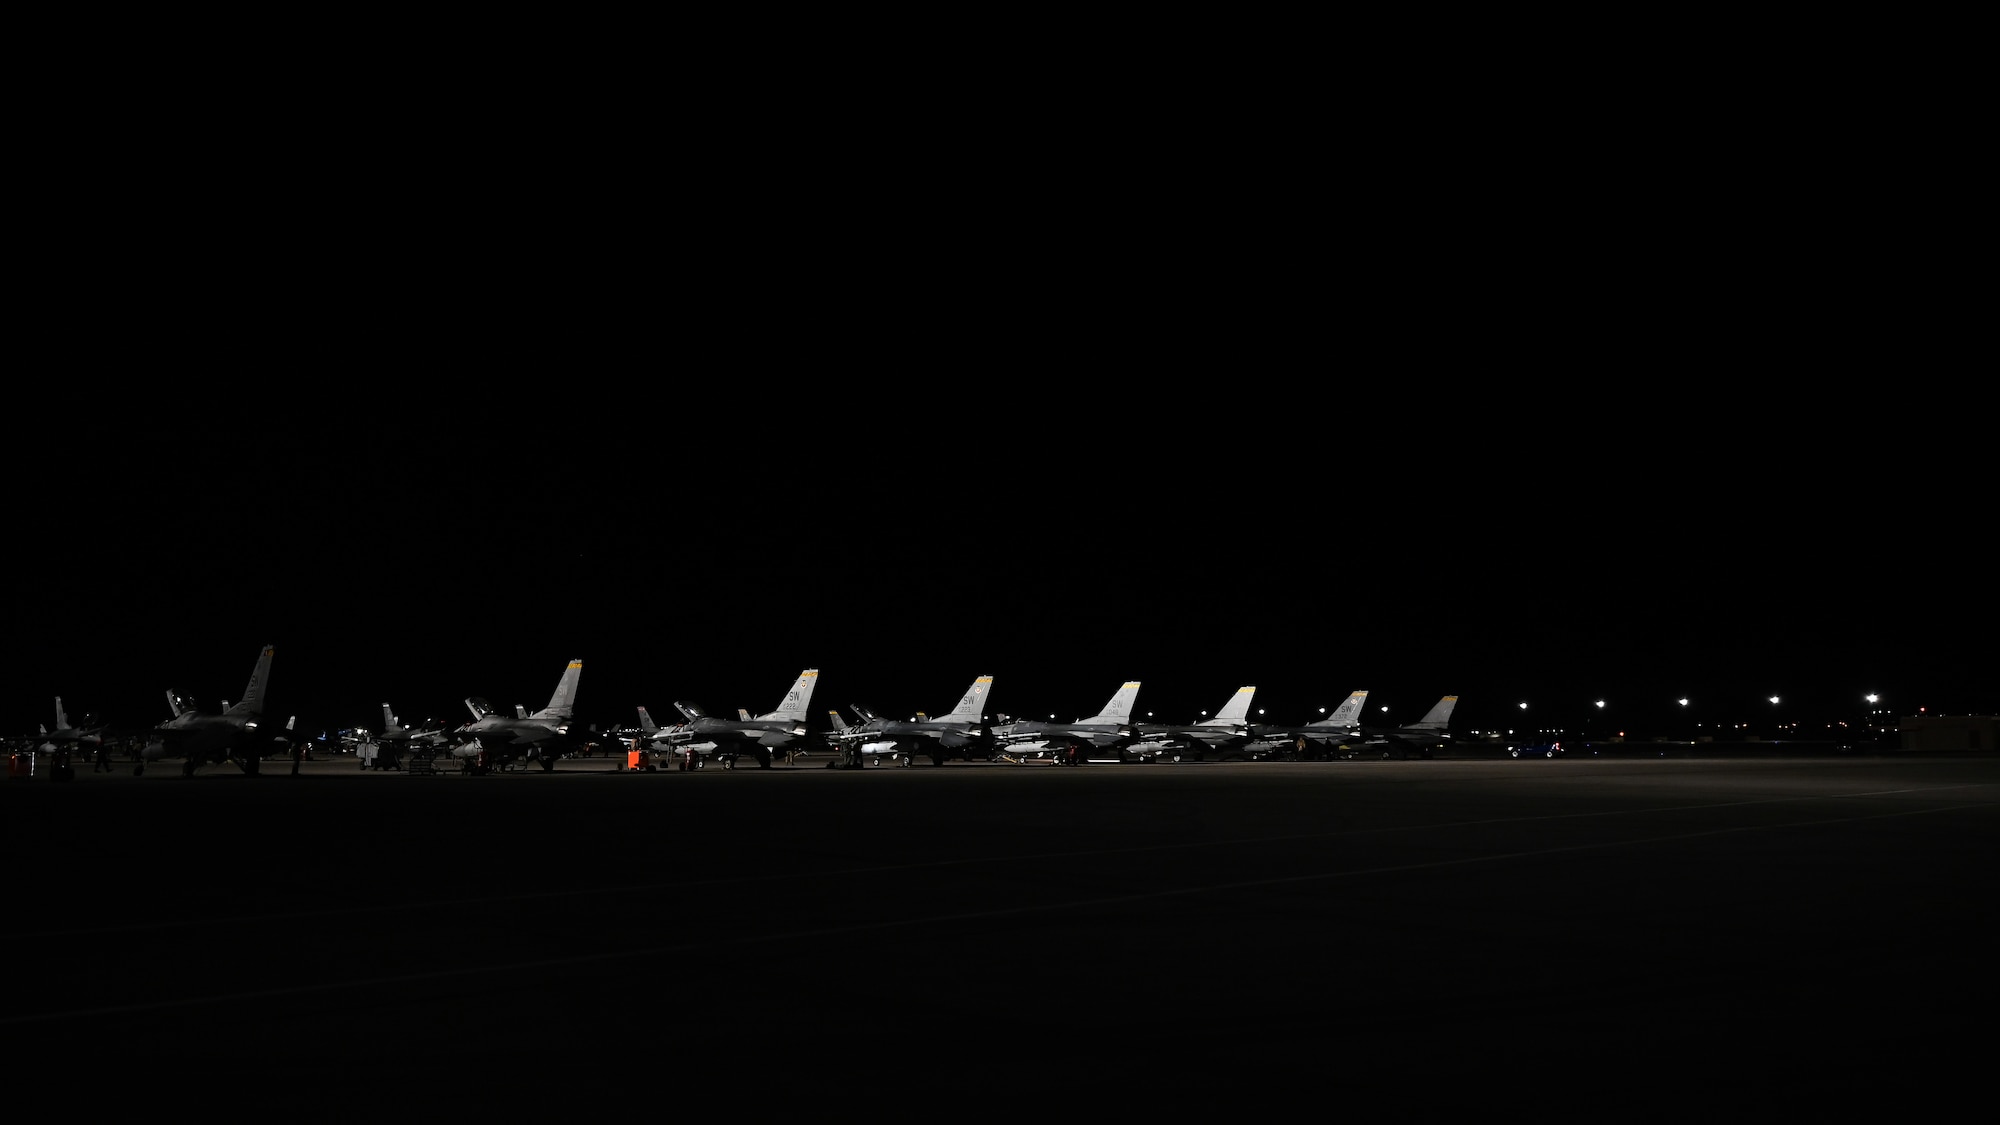 U.S. Air Force F-16 Fighting Falcons stand static on the flightline prior to the night scenarios of exercise Red Flag-Nellis (RF-N) 23-2 at Nellis Air Force Base, Nevada, March 16, 2023. Participants in RF-N 23-2 conduct a variety of scenarios, including defensive counterair, offensive-counterair suppression of enemy air defenses and offensive counterair-air interdiction. (U.S. Air Force photo by Staff Sgt. Madeline Herzog)